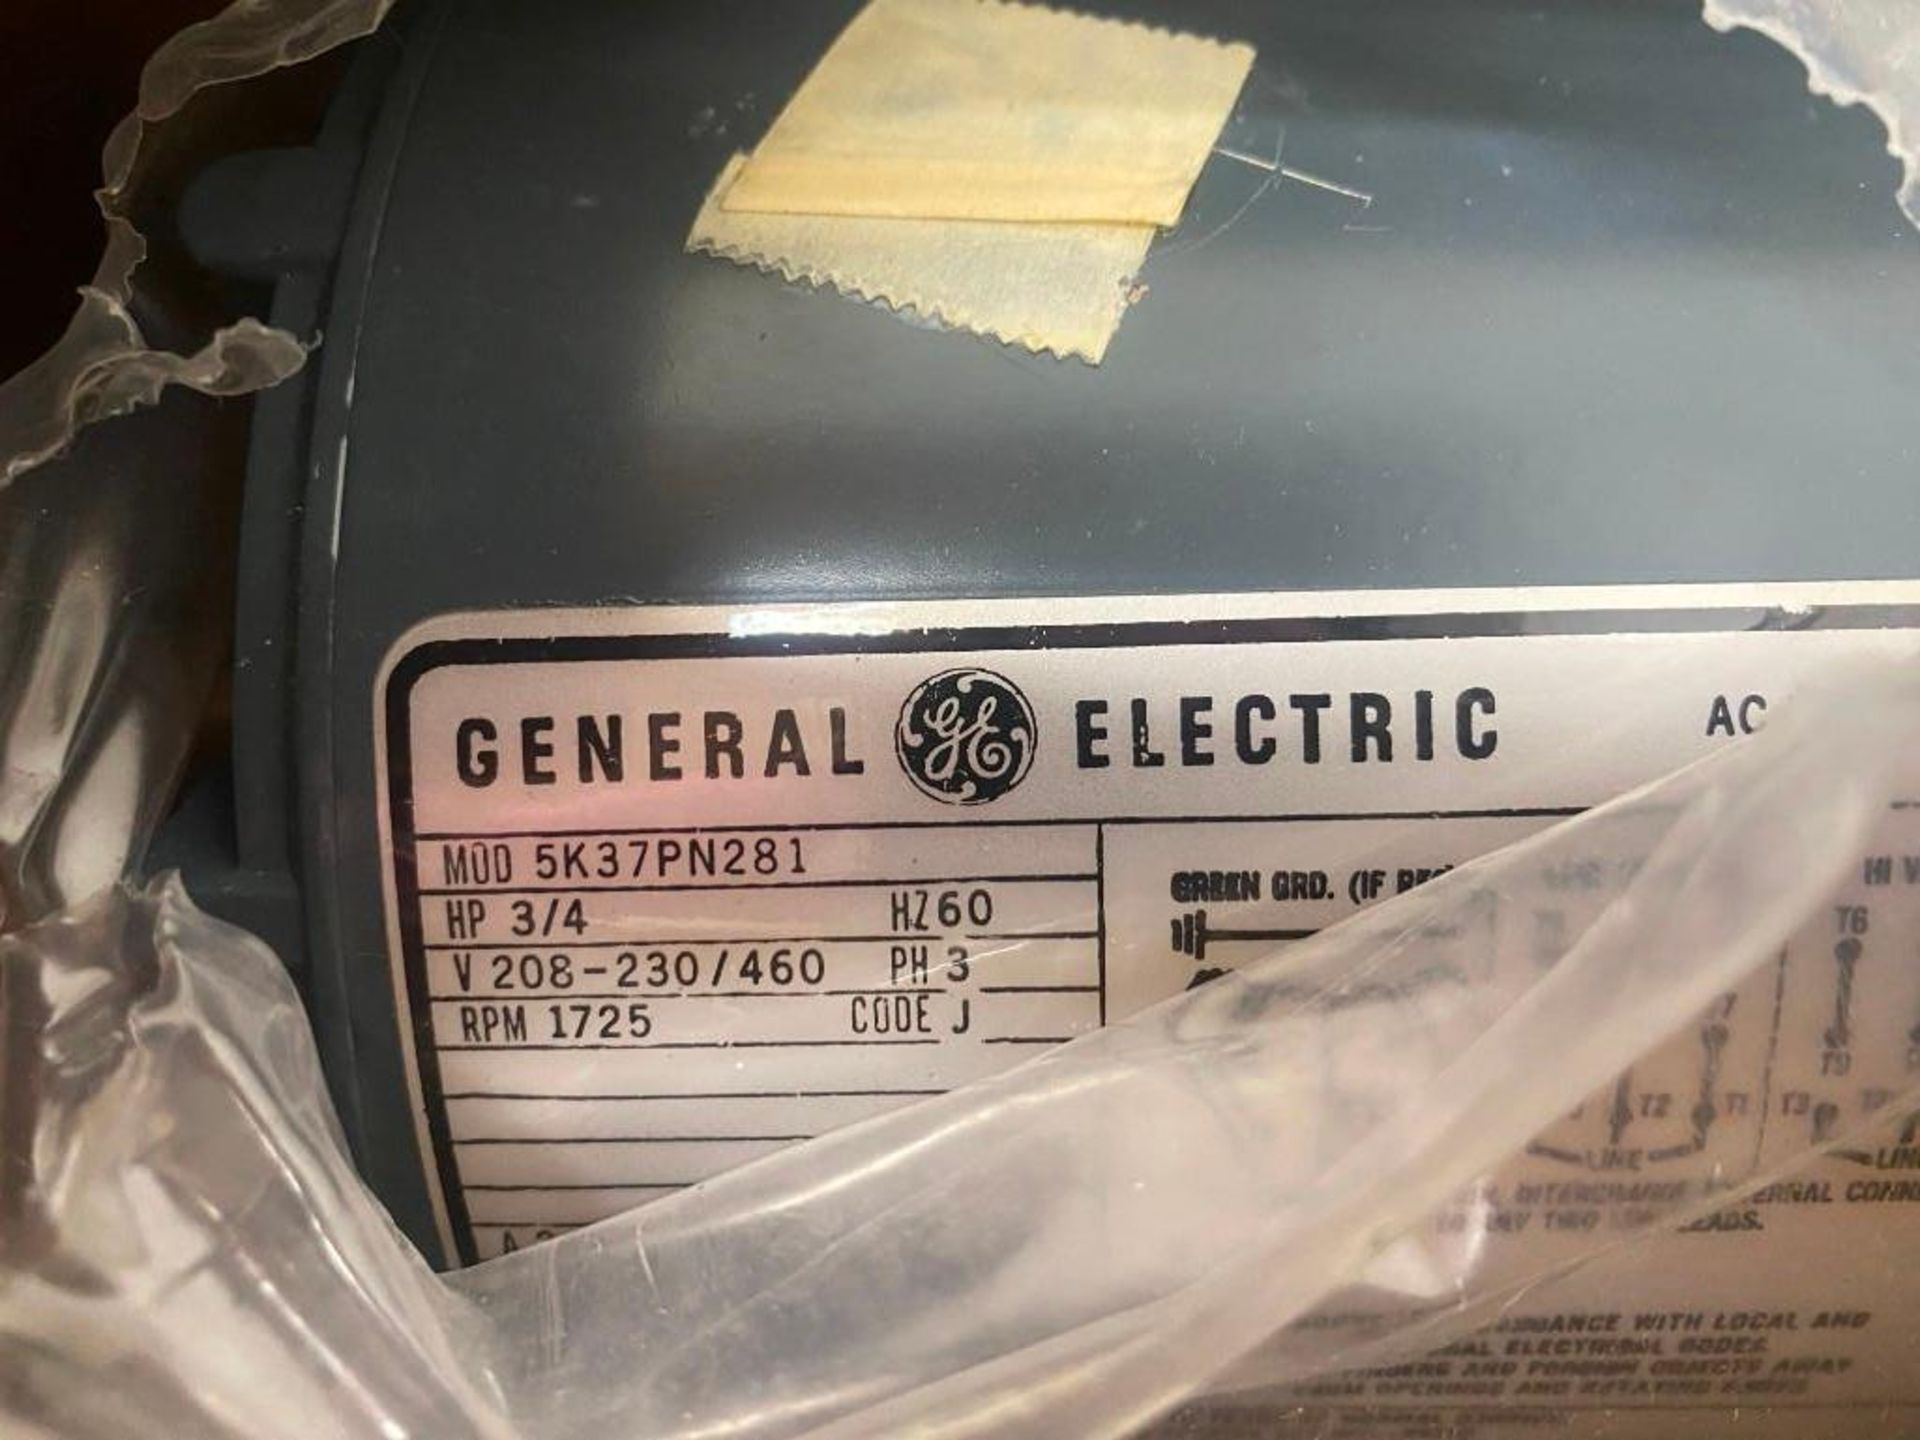 NEW IN BOX GENERAL ELECTRIC 5K37PN281 - Image 2 of 2